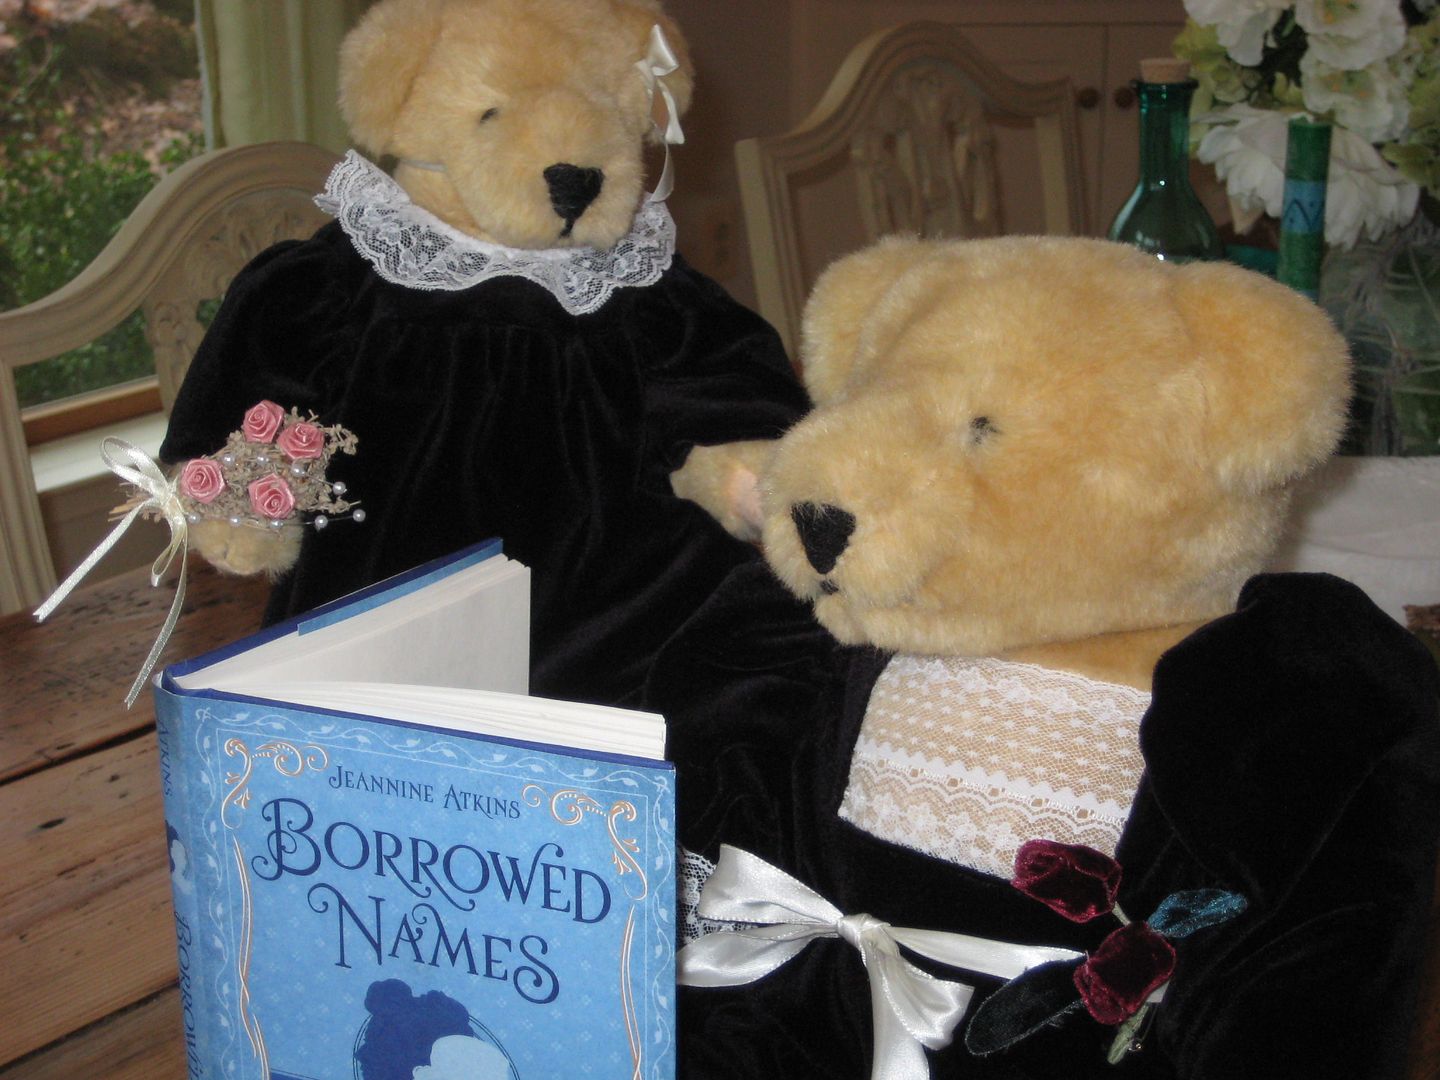 Borrowed Names: Poems about